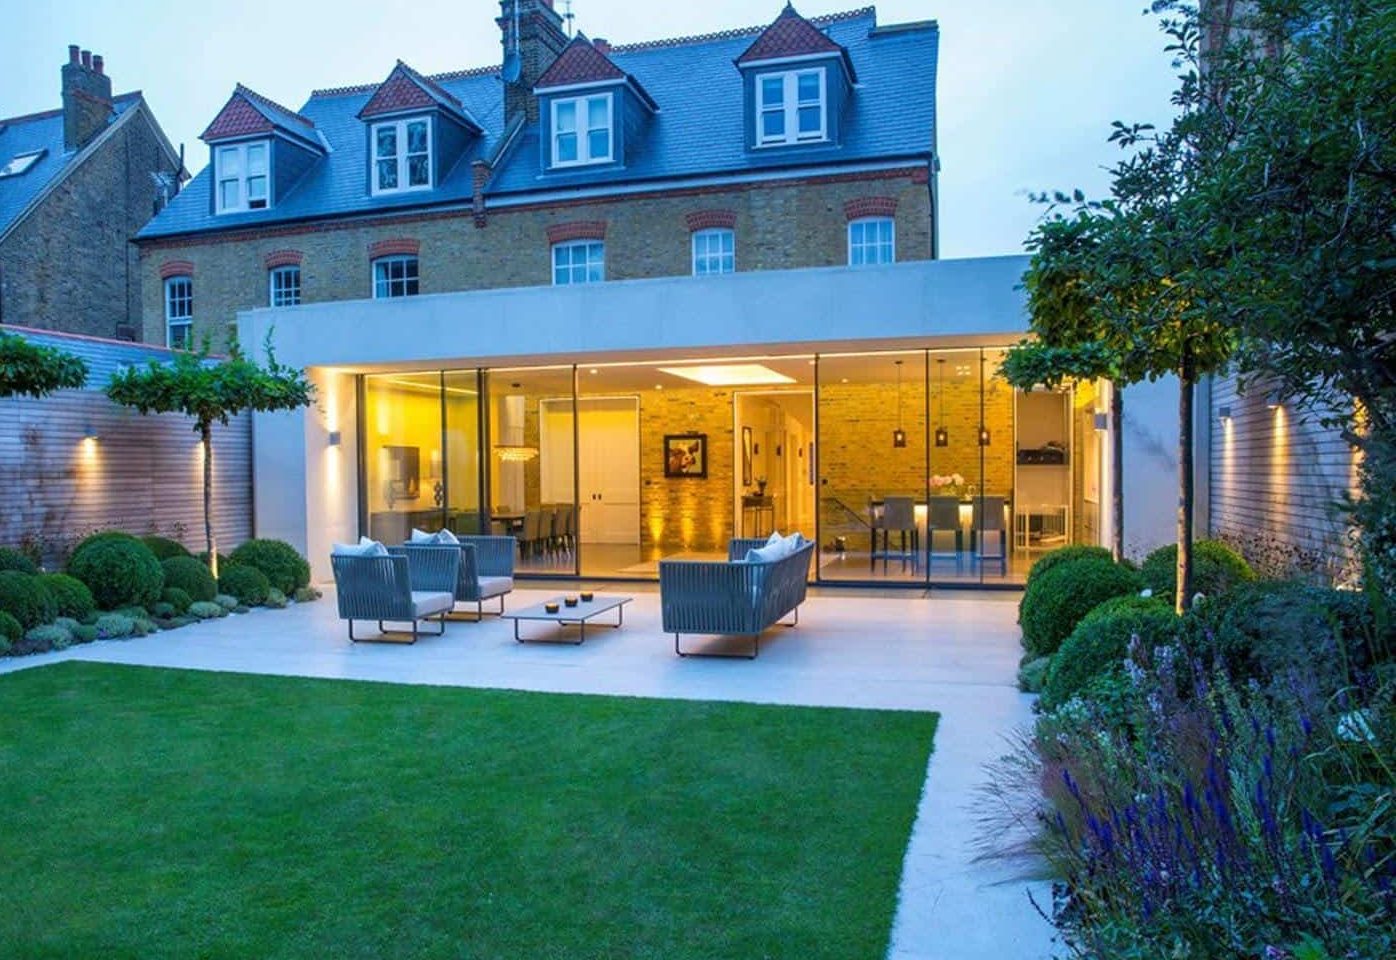 glass-front London Family Home, garden and patio